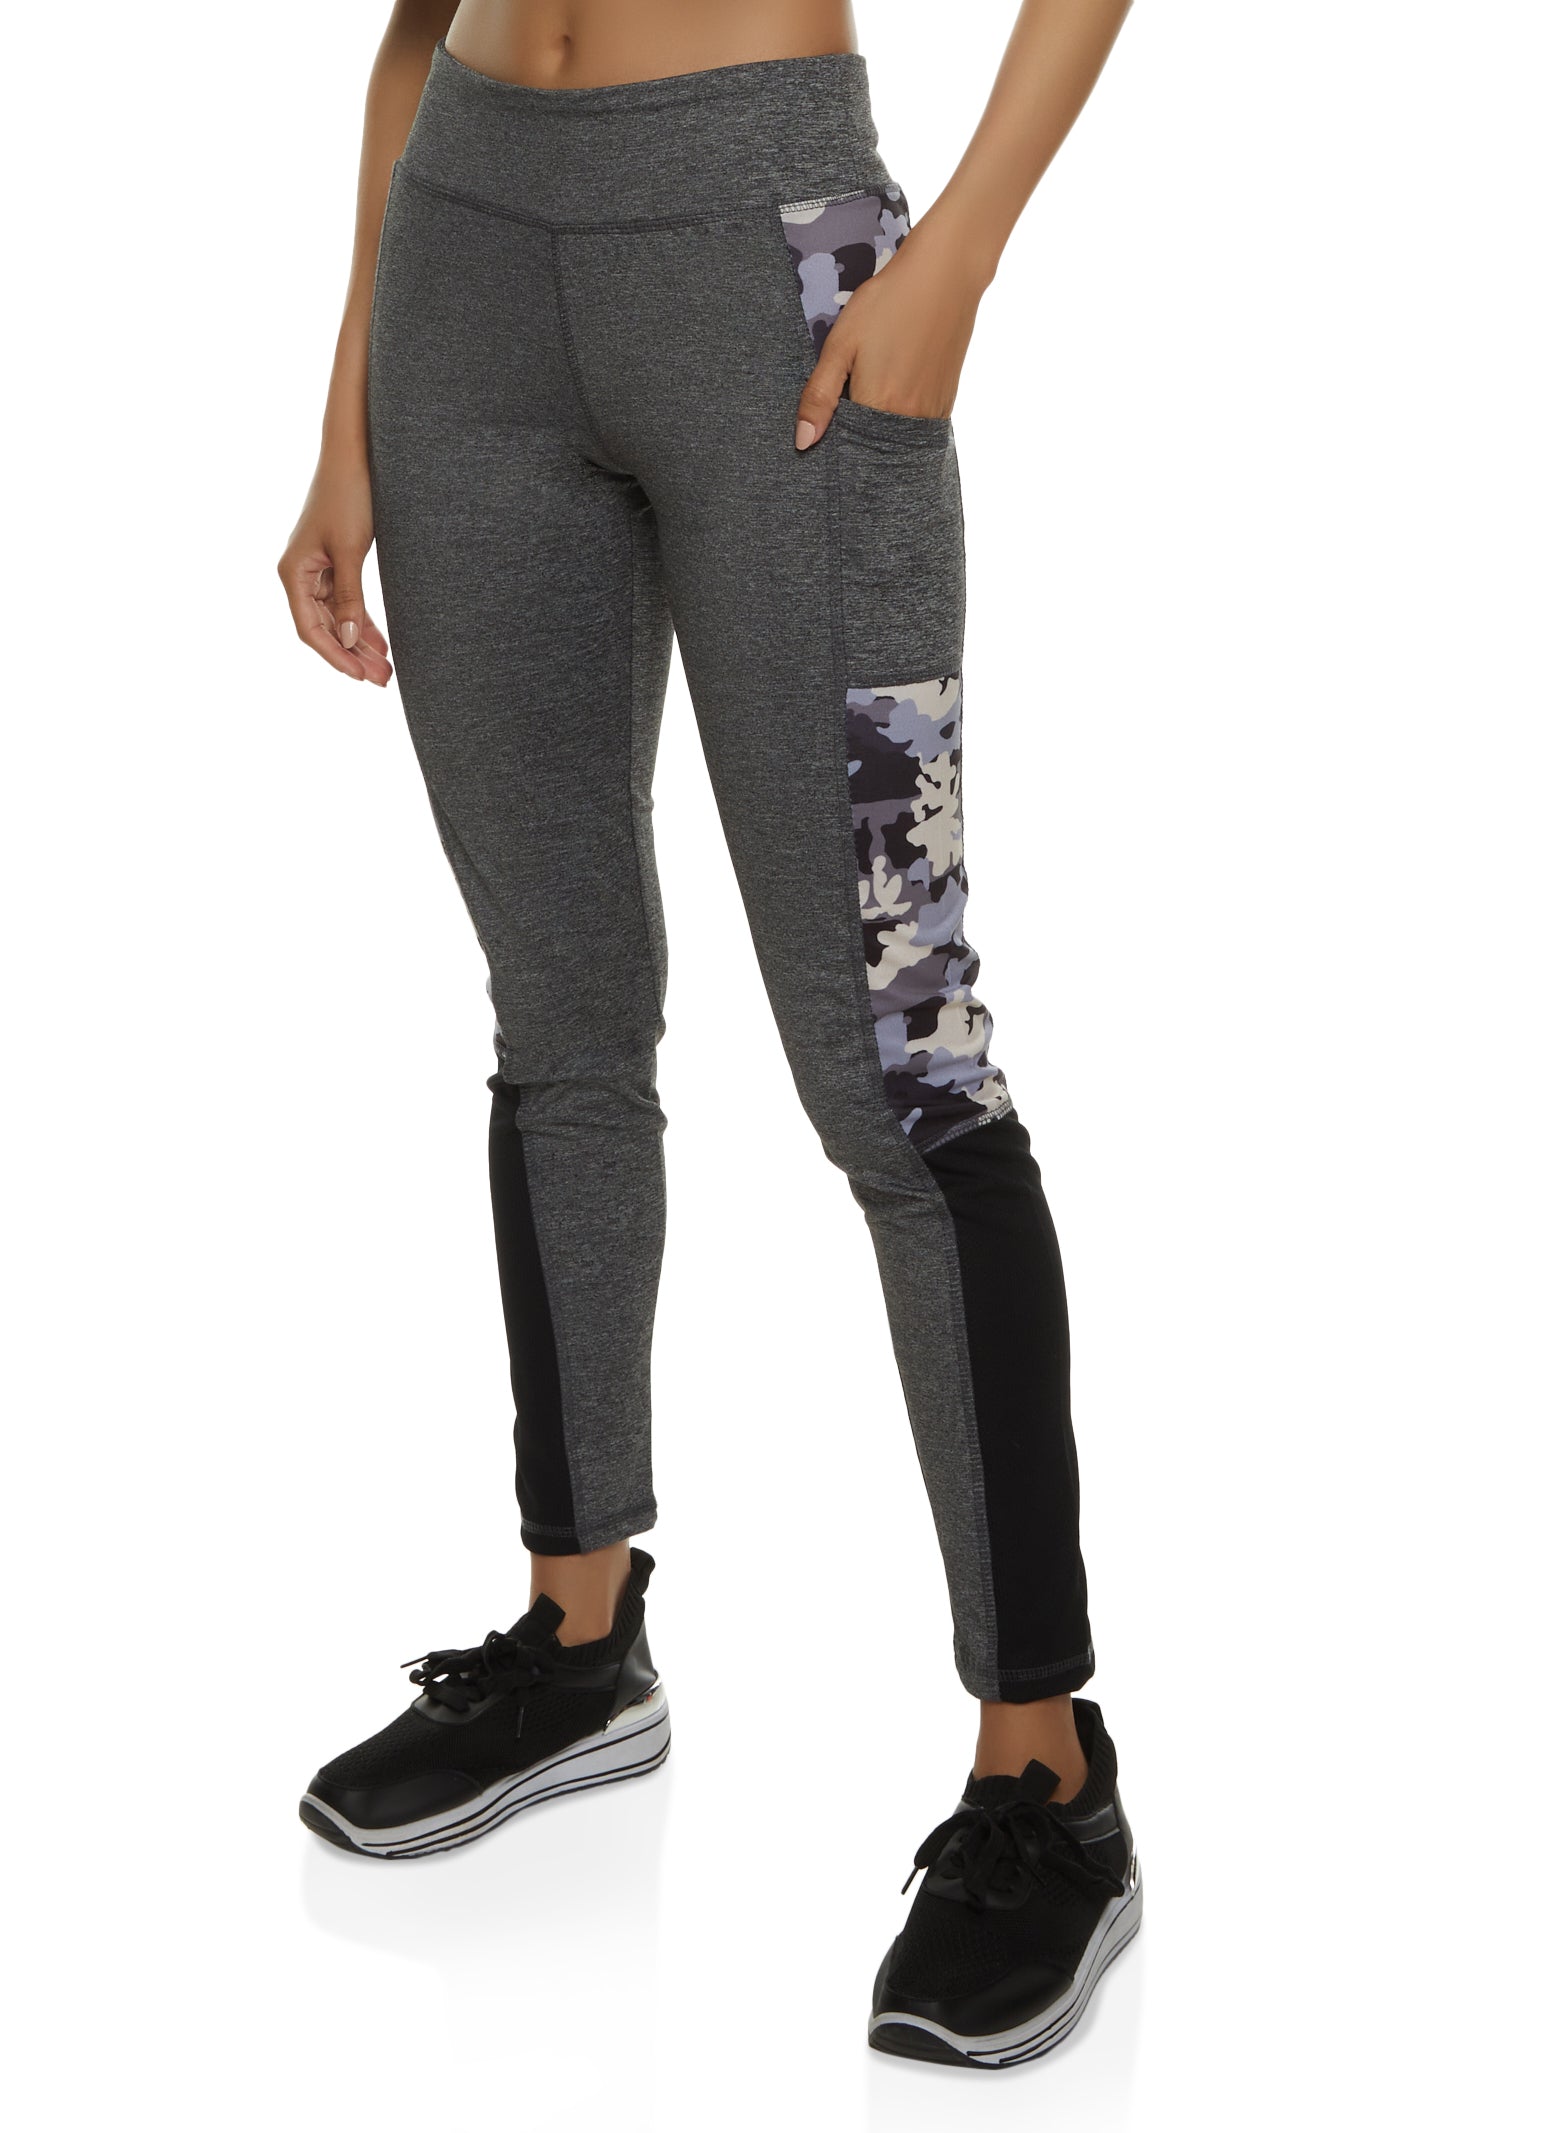 Who Manufactures Costco Leggings Women's | International Society of  Precision Agriculture